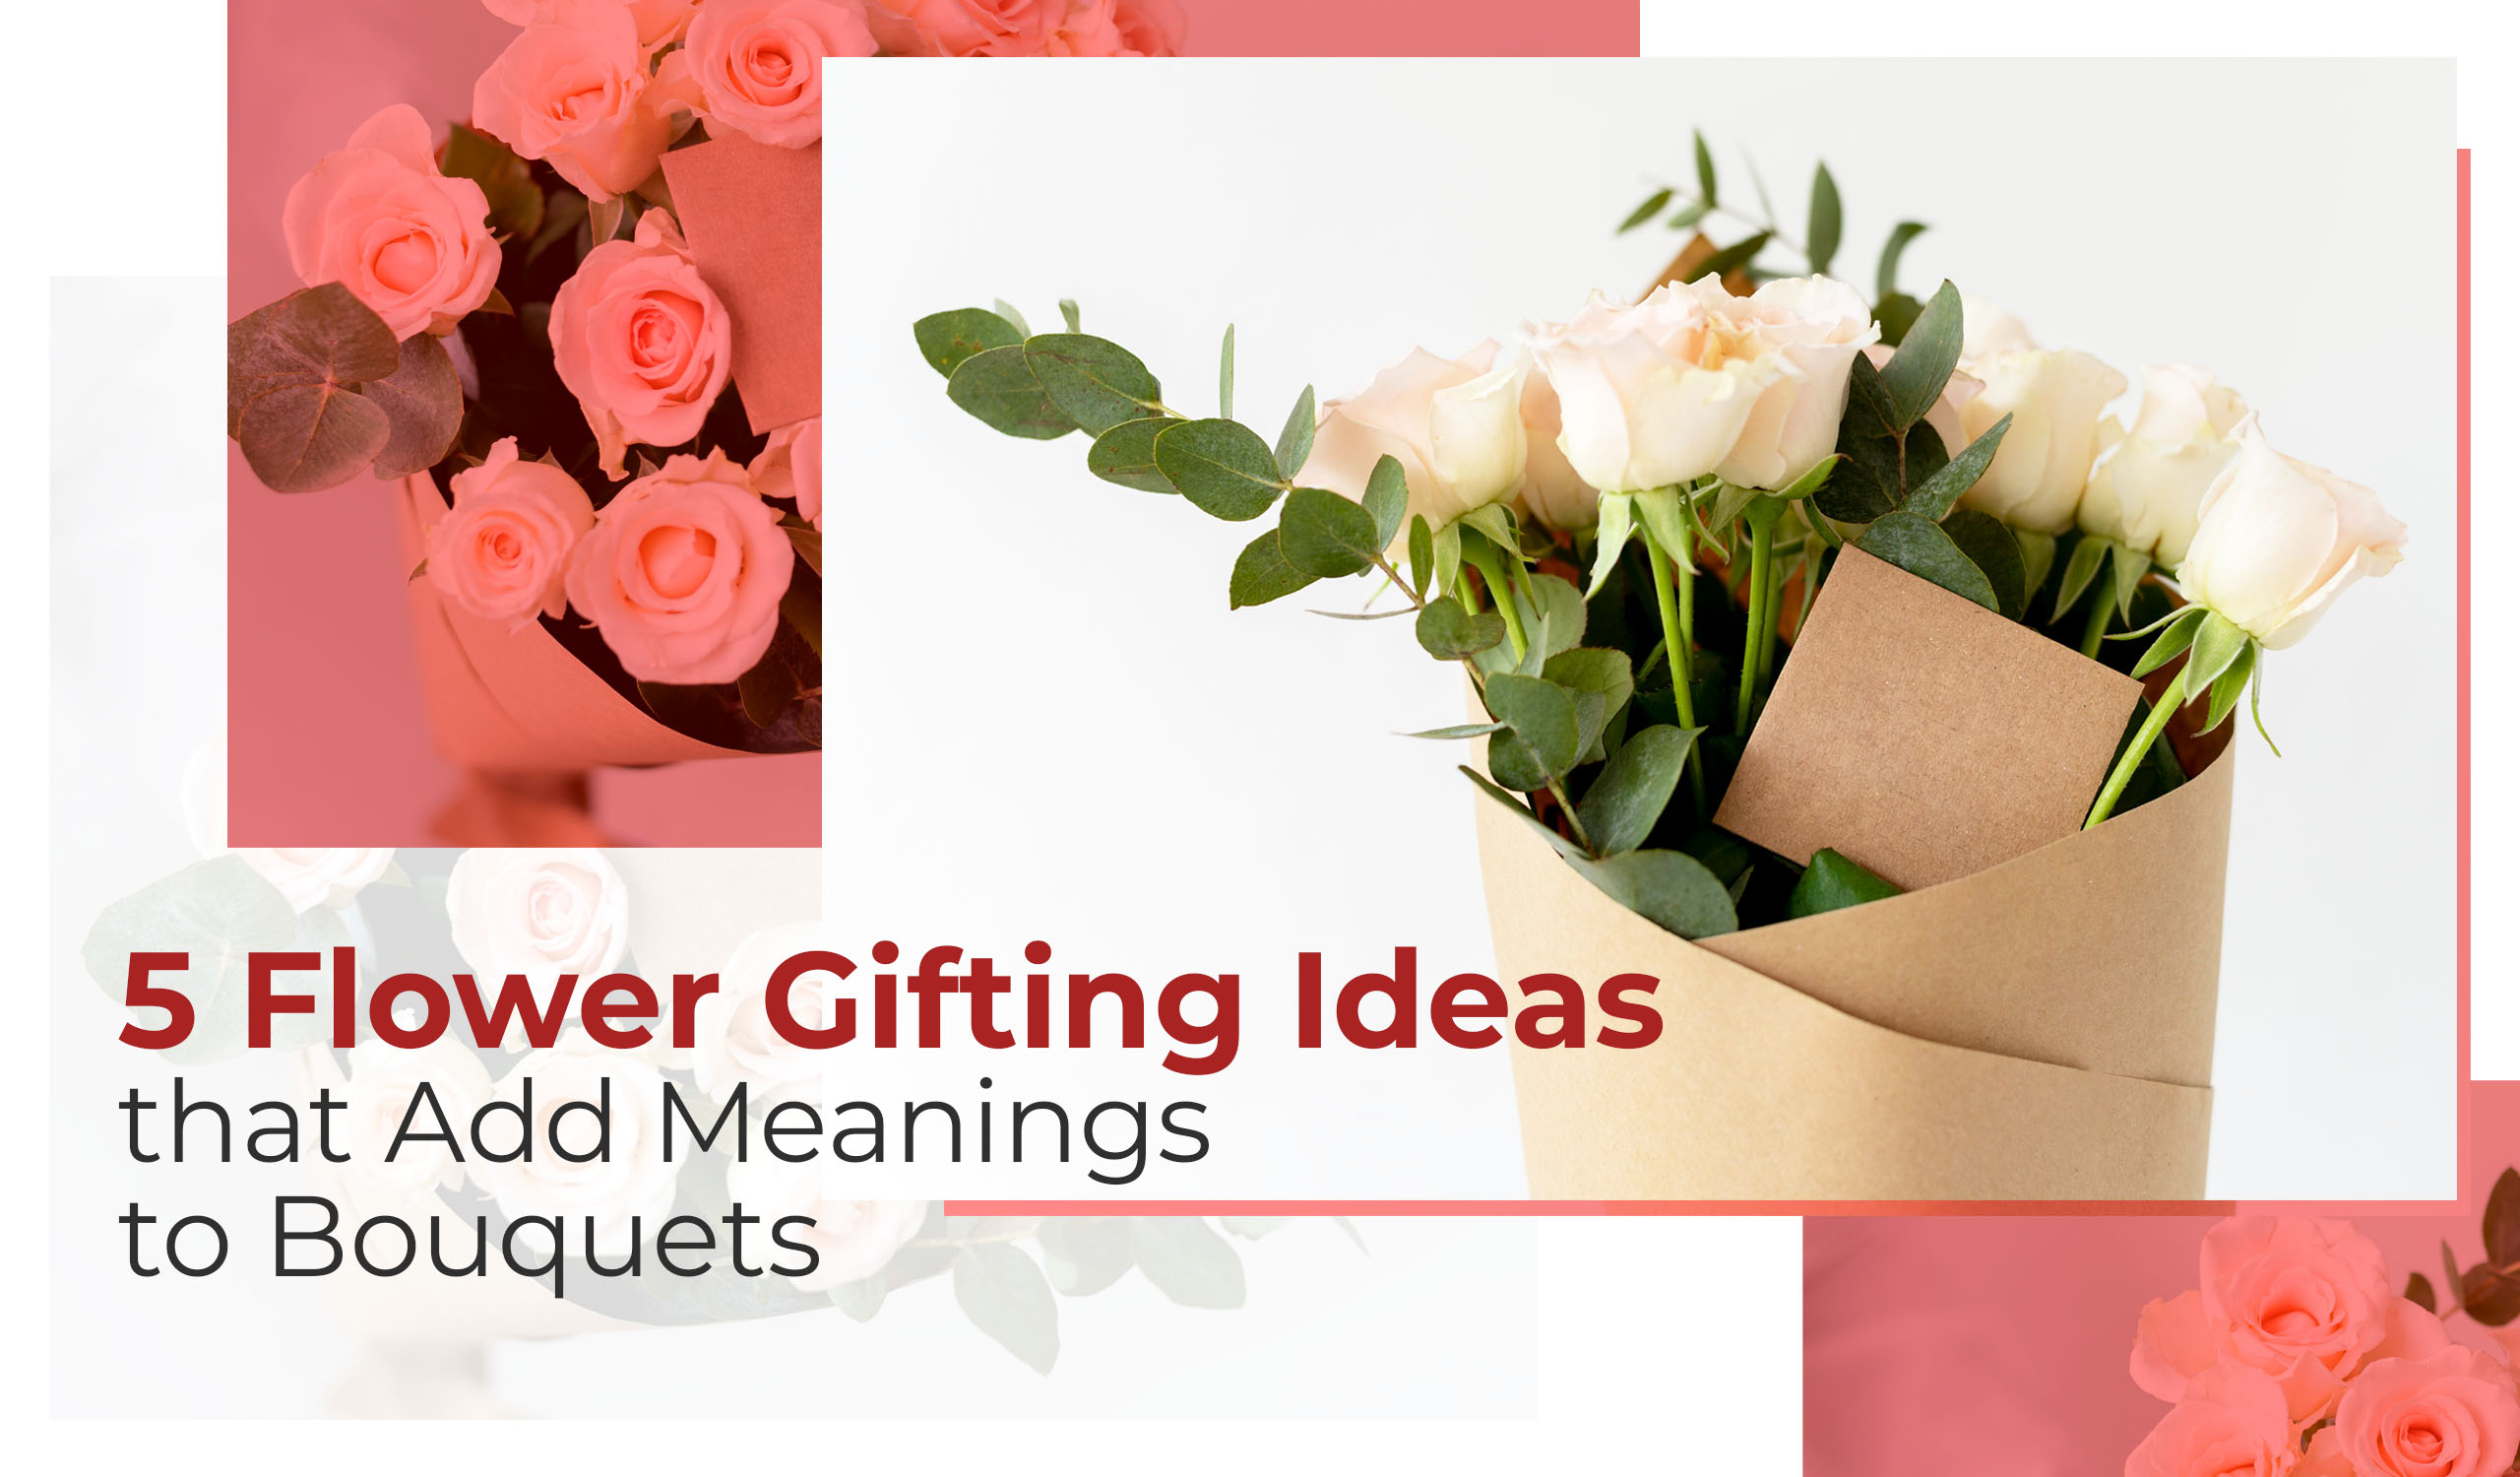 8 Flower Gifting Ideas that Add Meanings to Bouquets